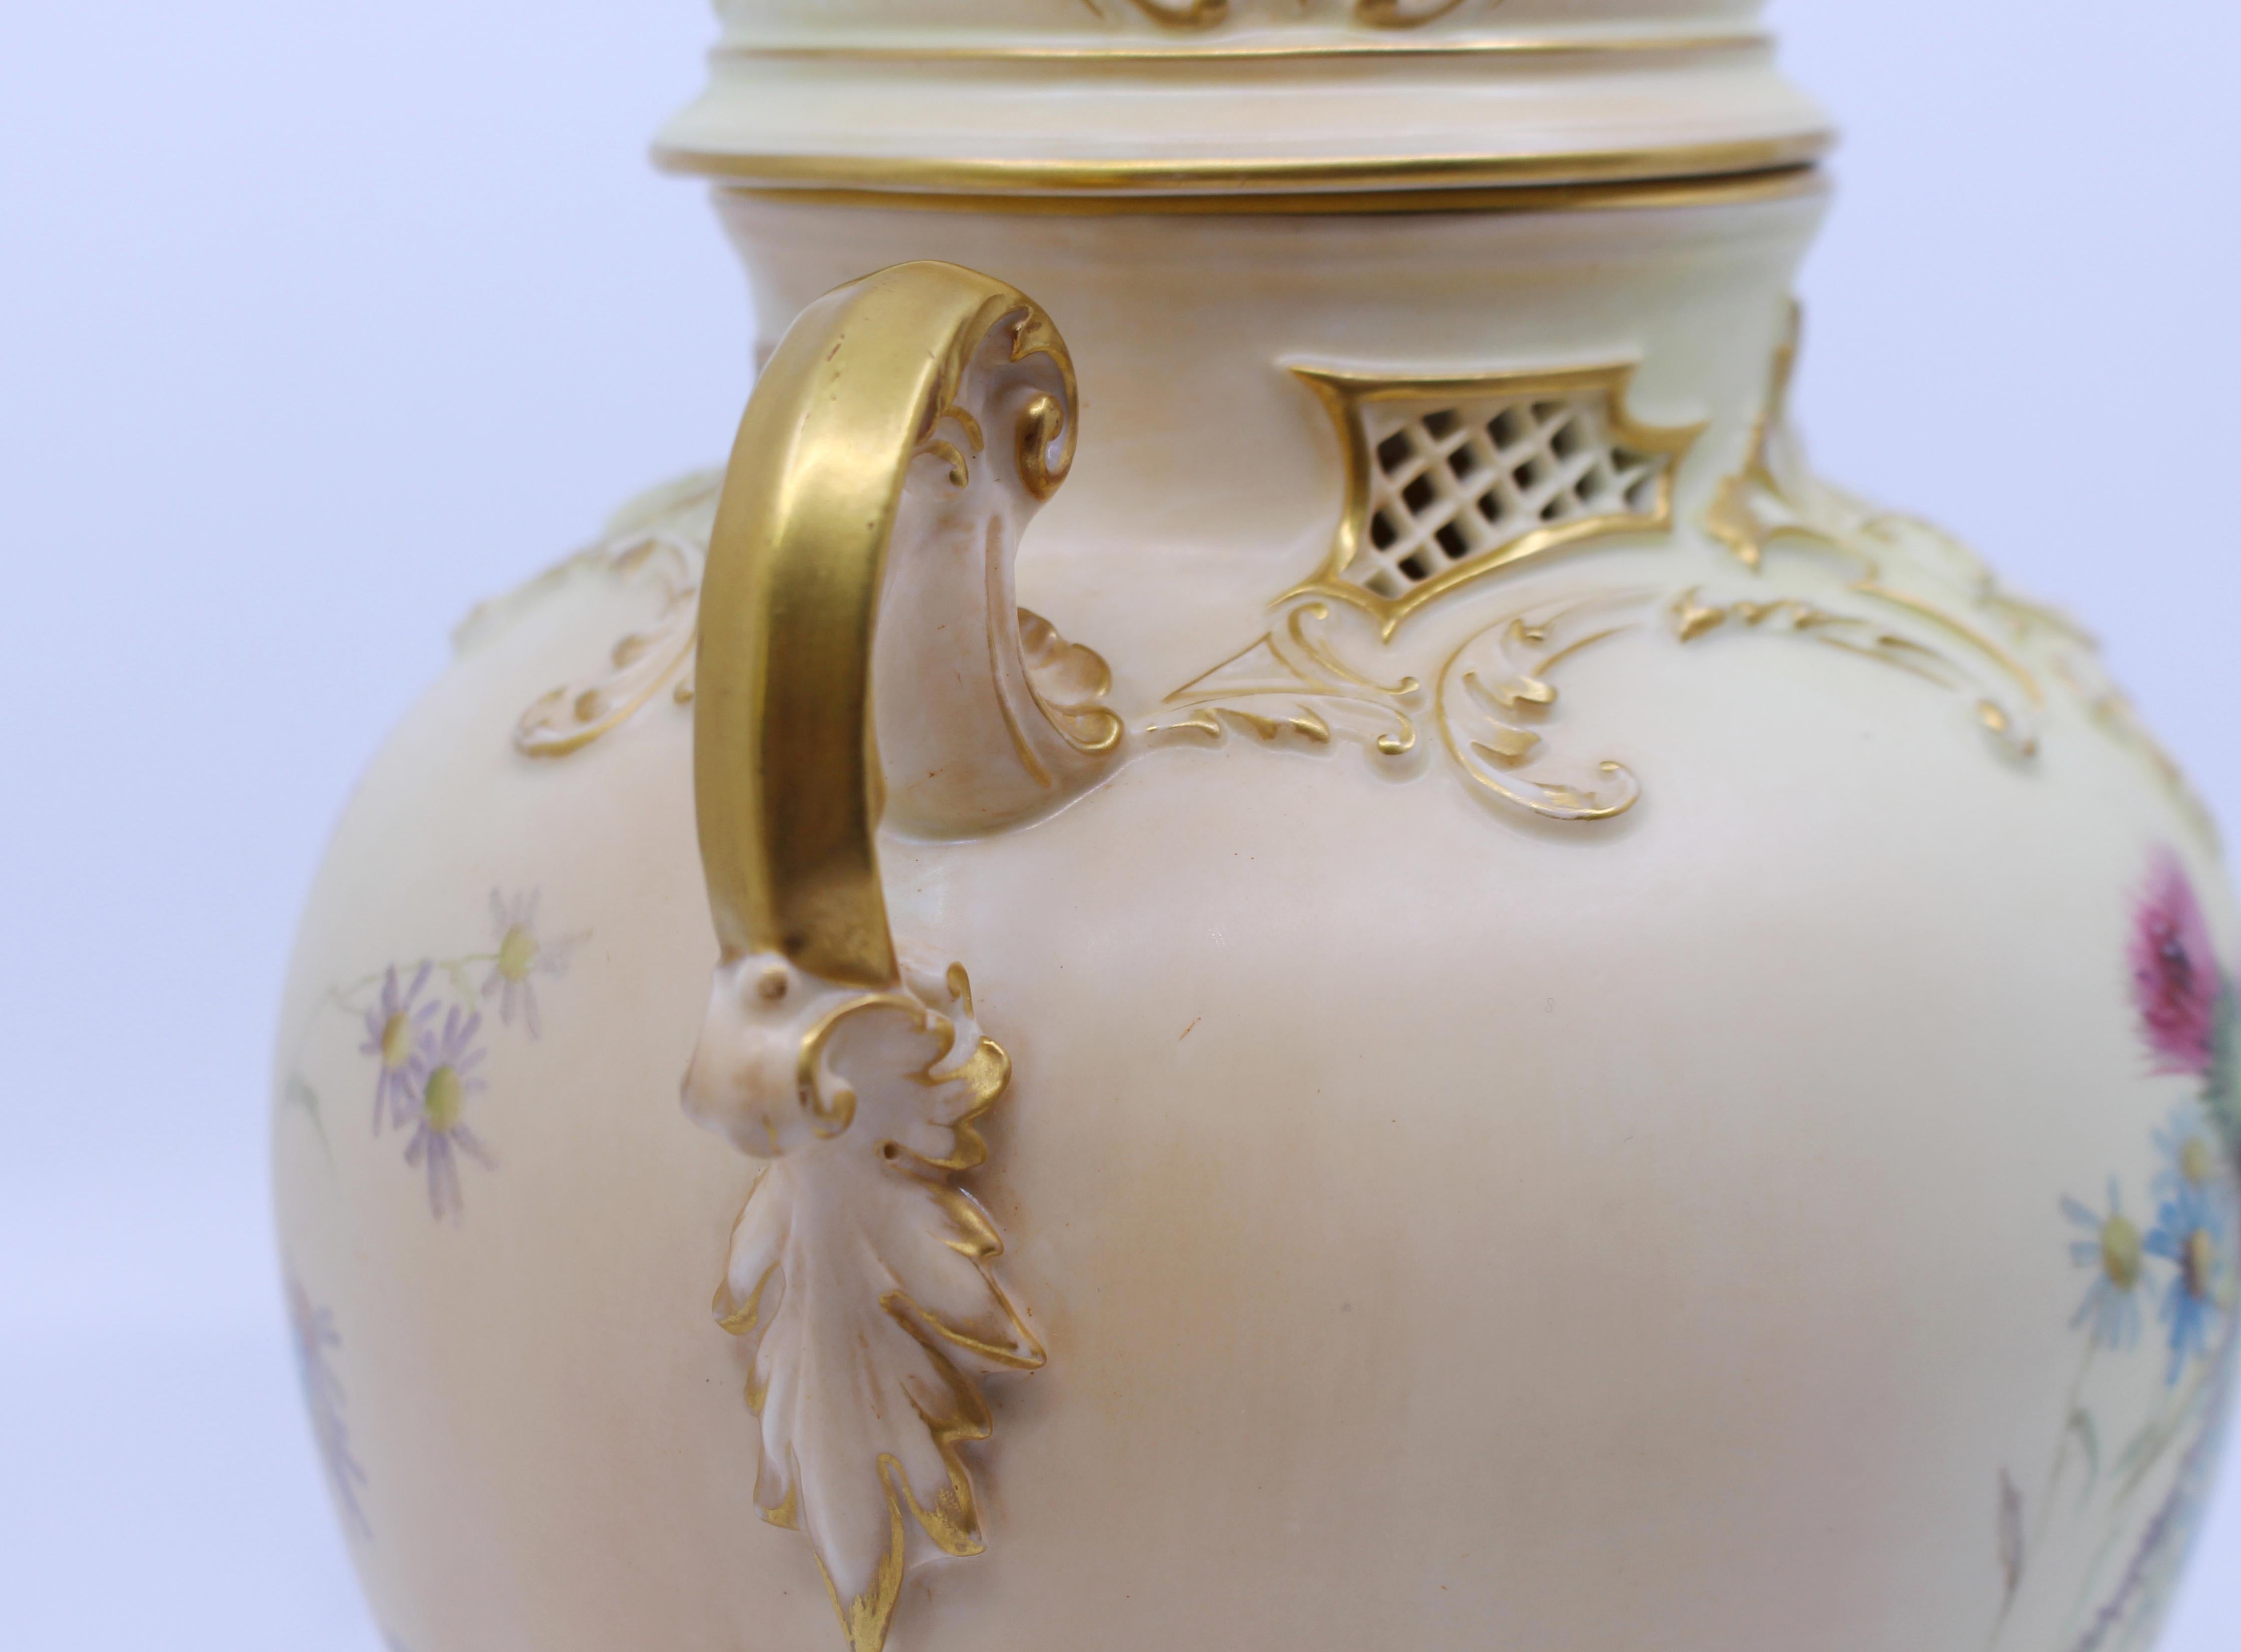 Royal Worcester Edward Raby Two Handled Vase and Cover, 1896 For Sale 8